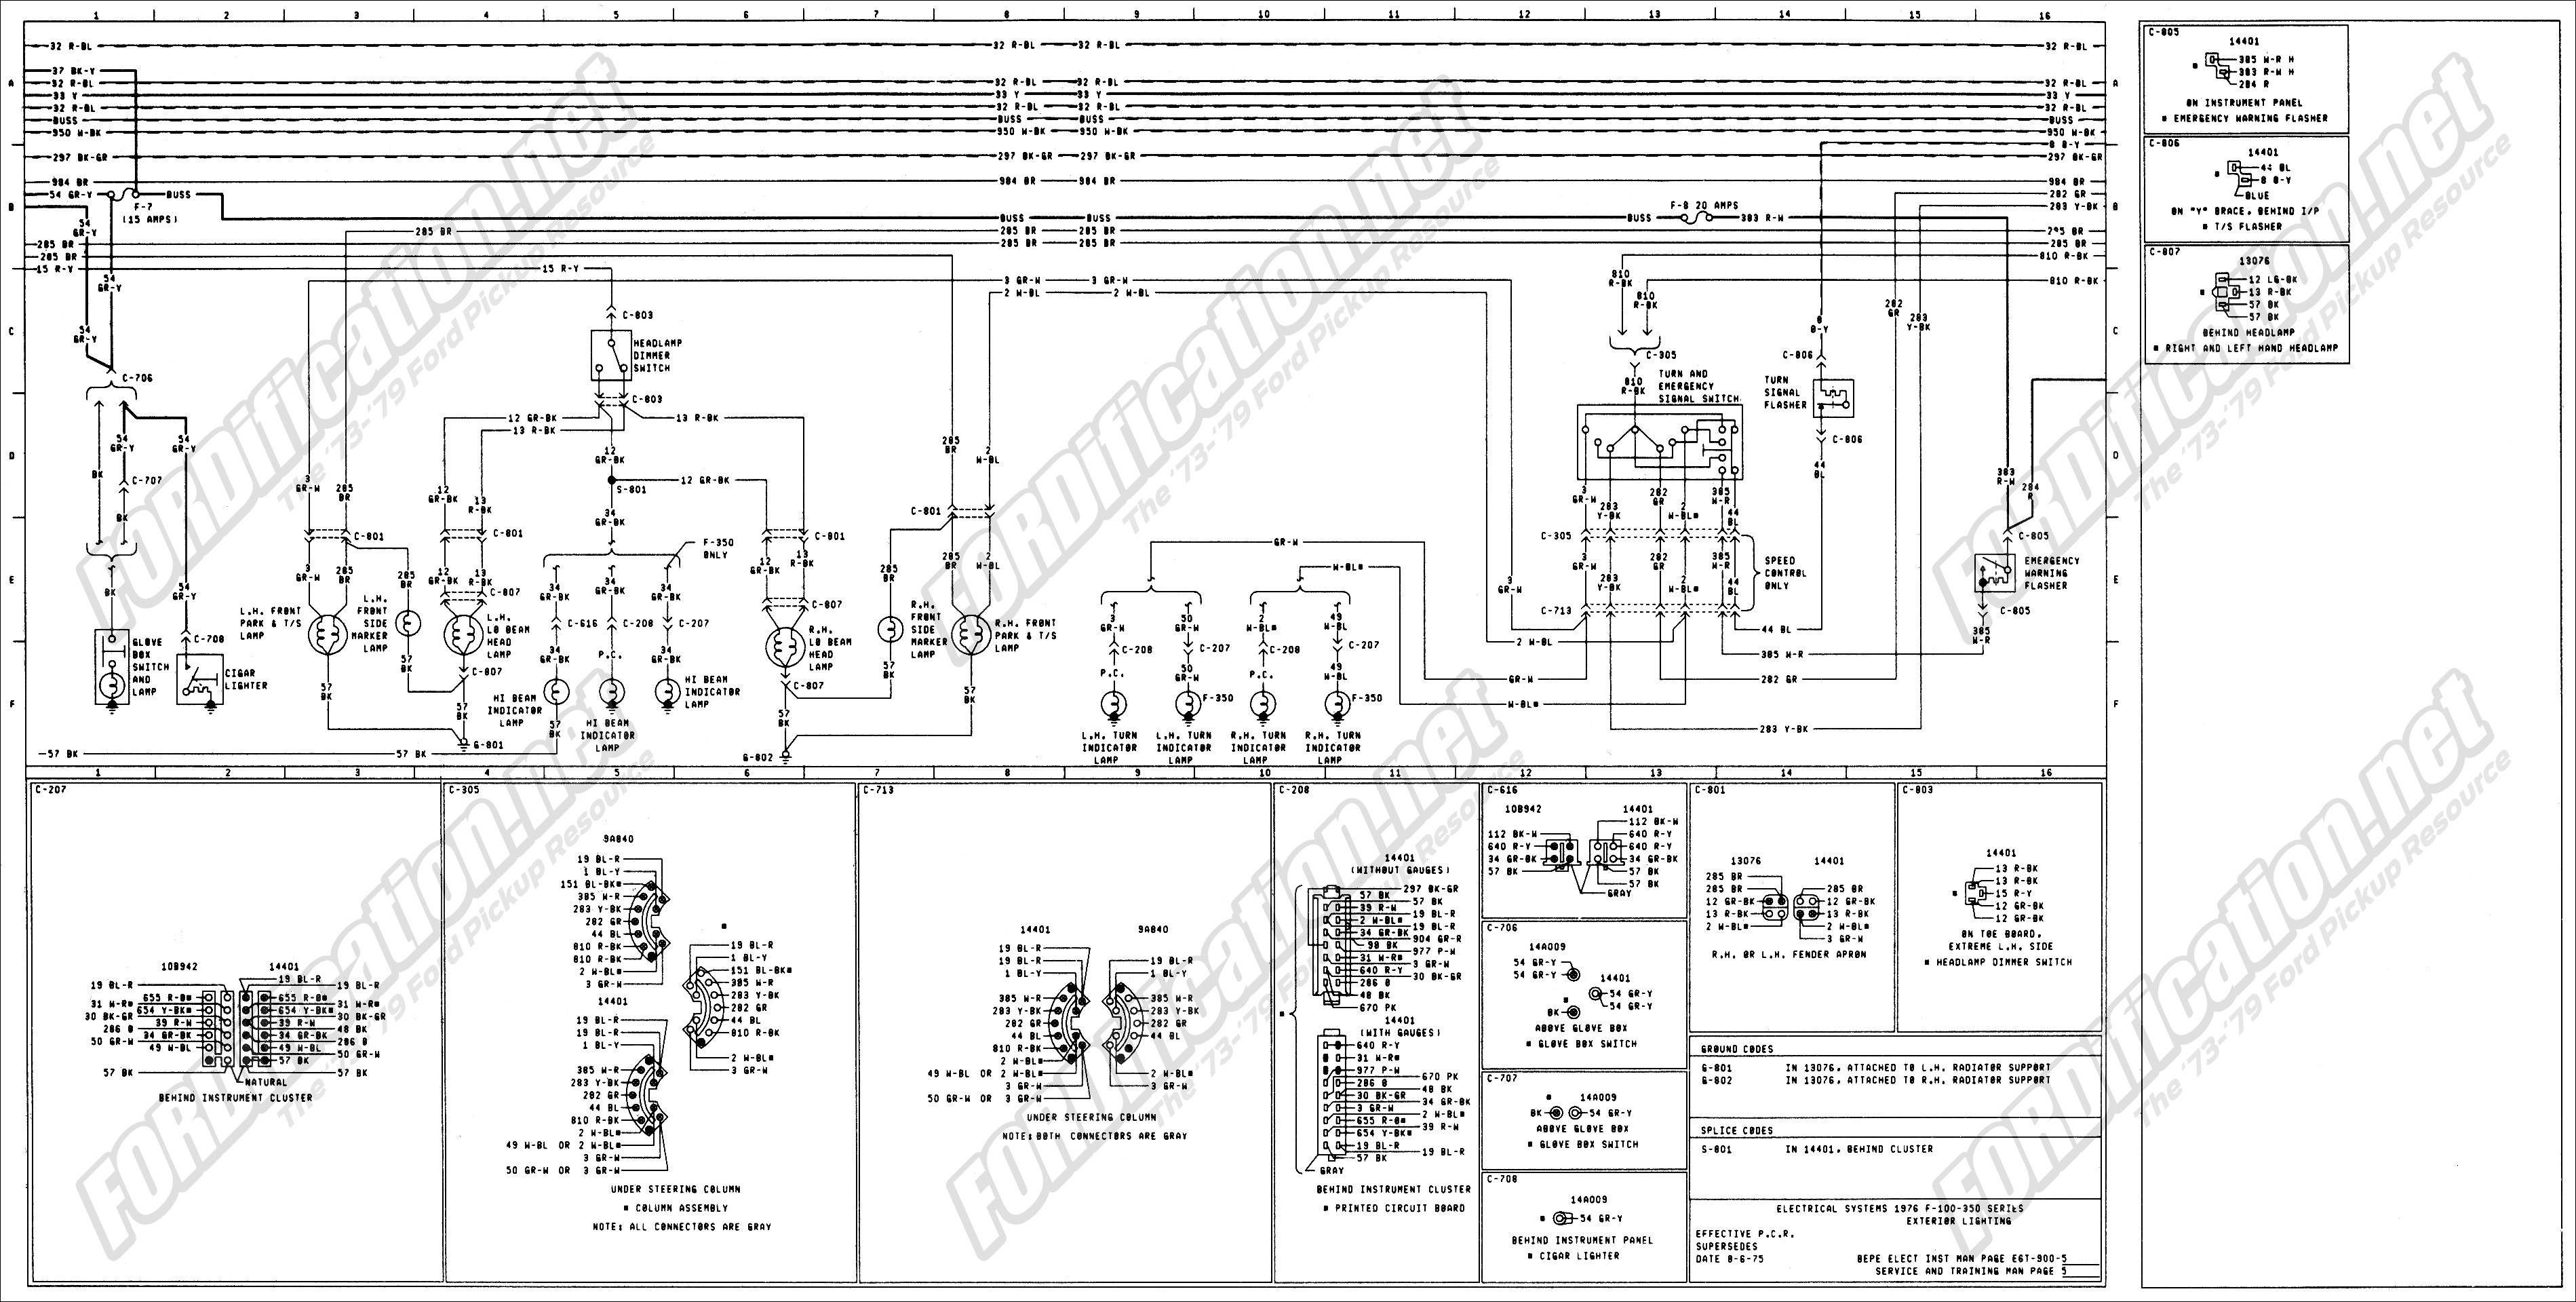 Ford F250 Tail Light Wiring 1973 1979 ford Truck Wiring Diagrams & Schematics Of Ford F250 Tail Light Wiring